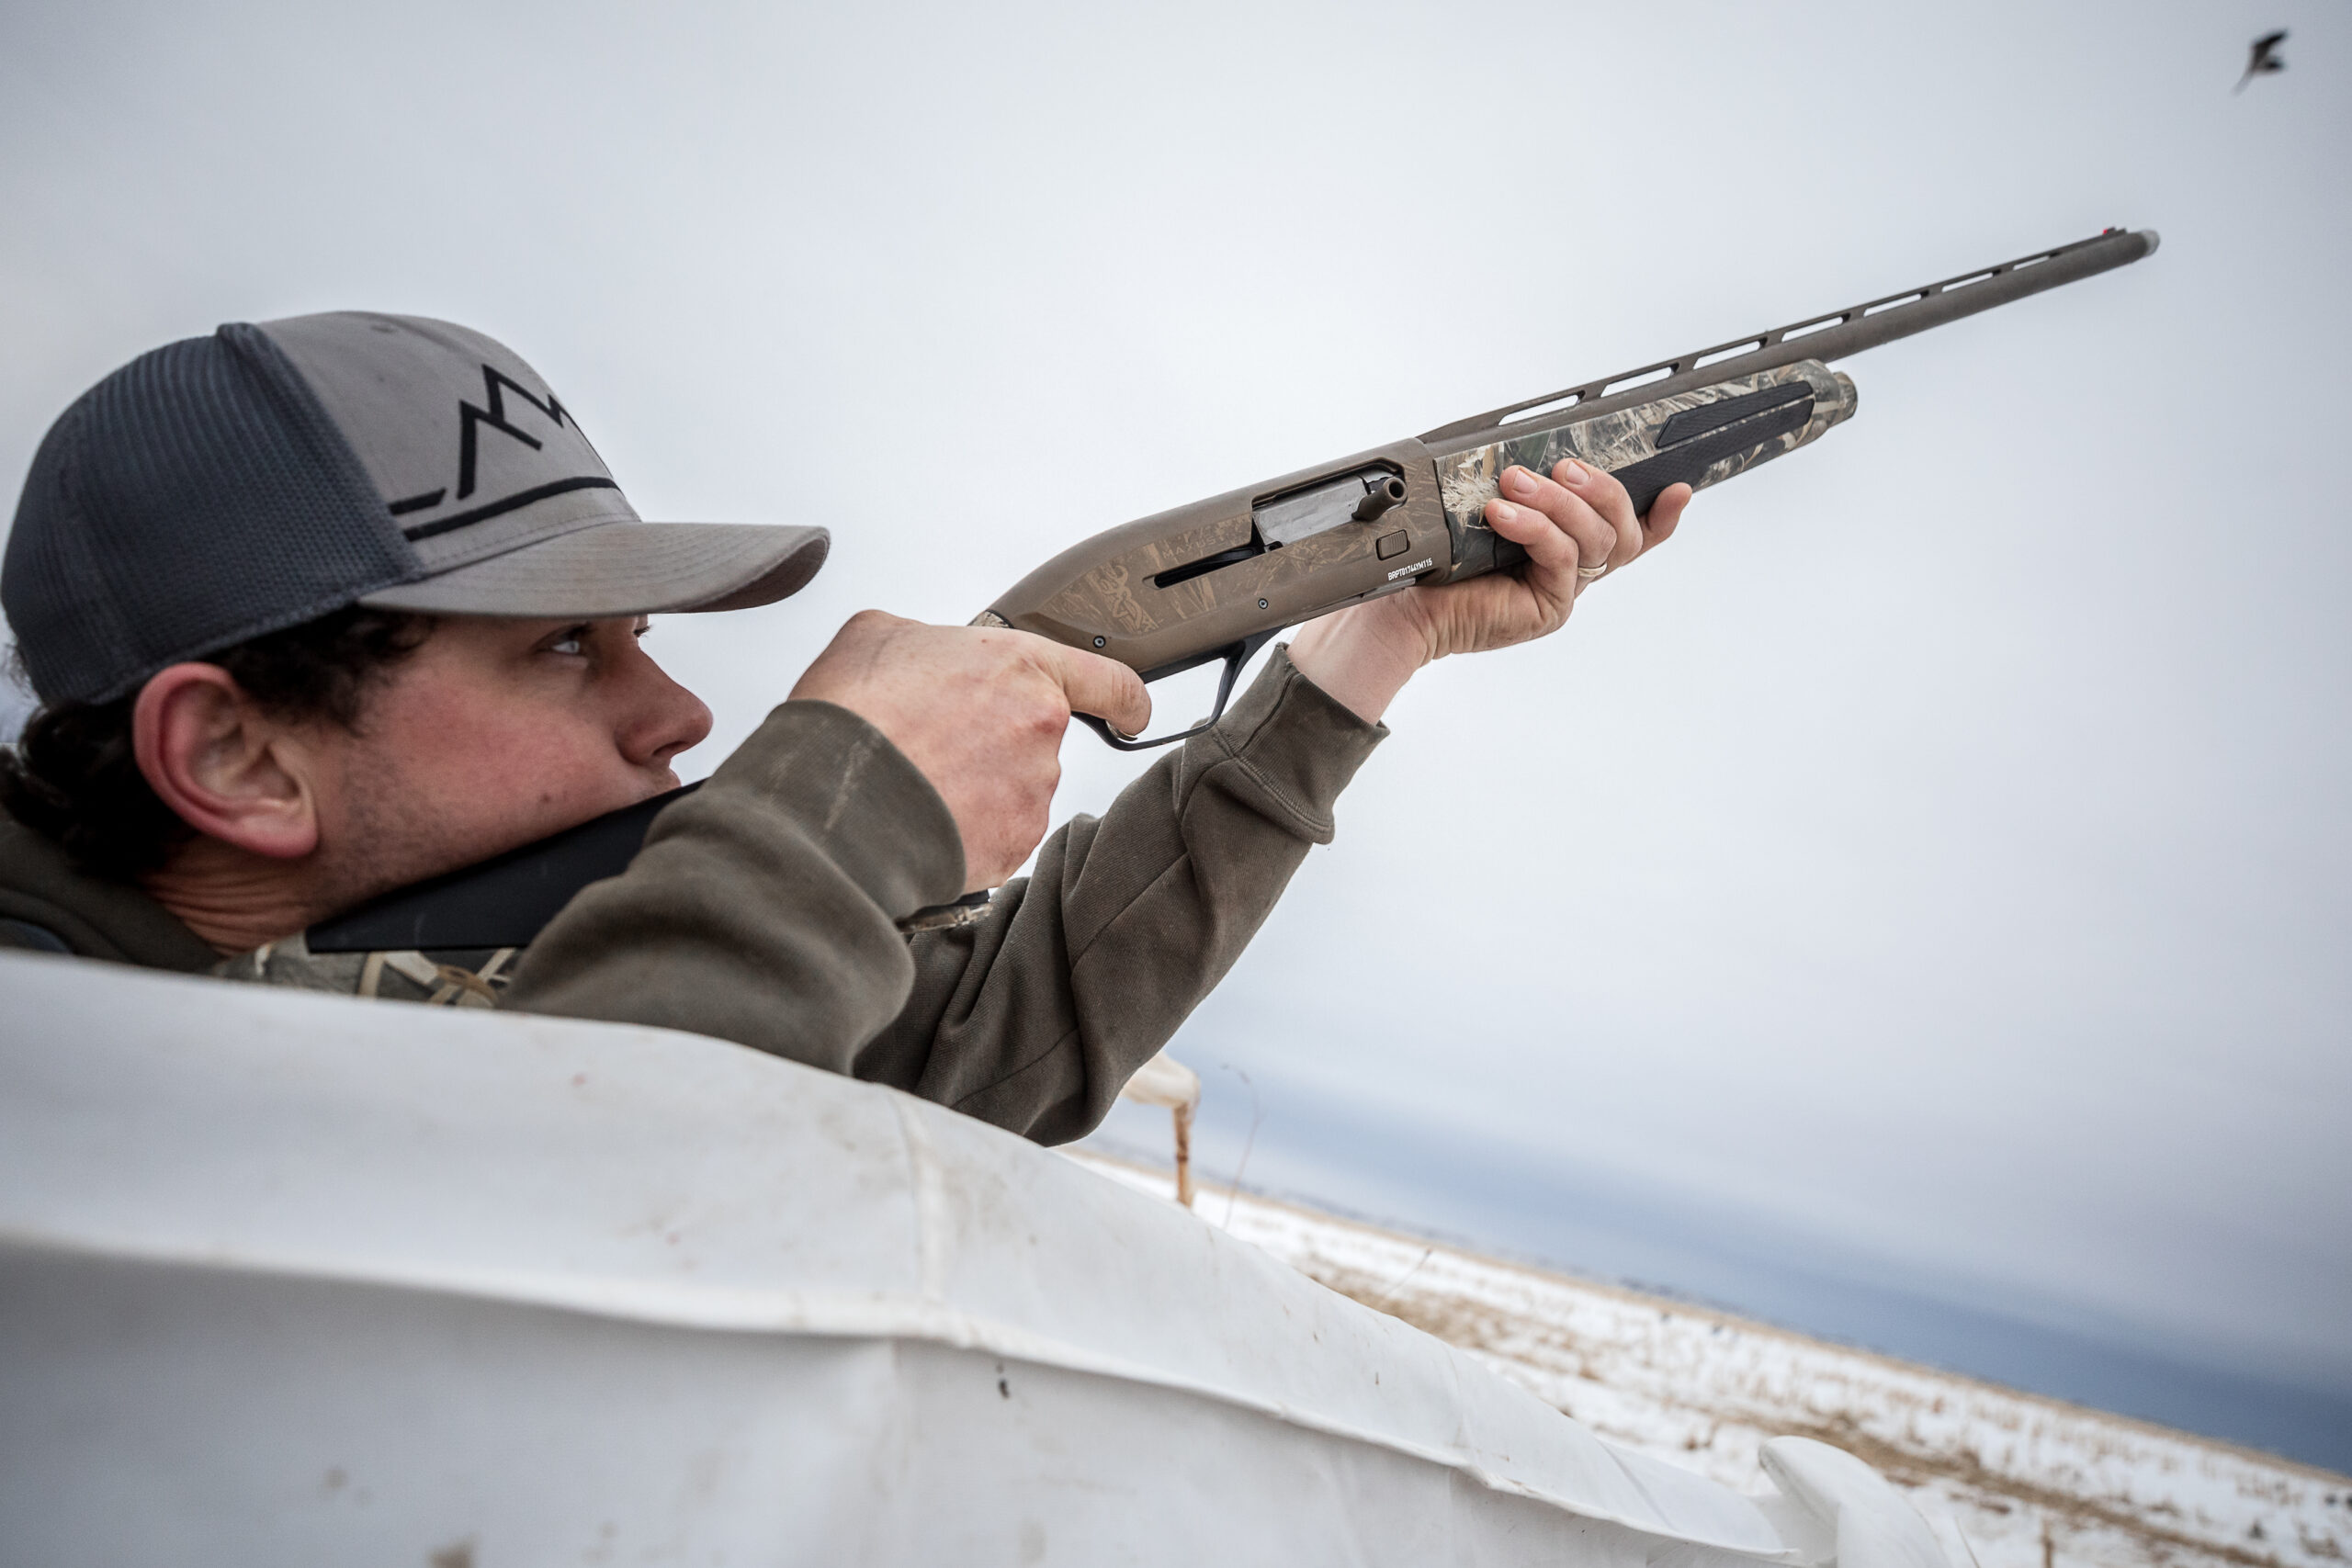 The new Maxus II from Browning.